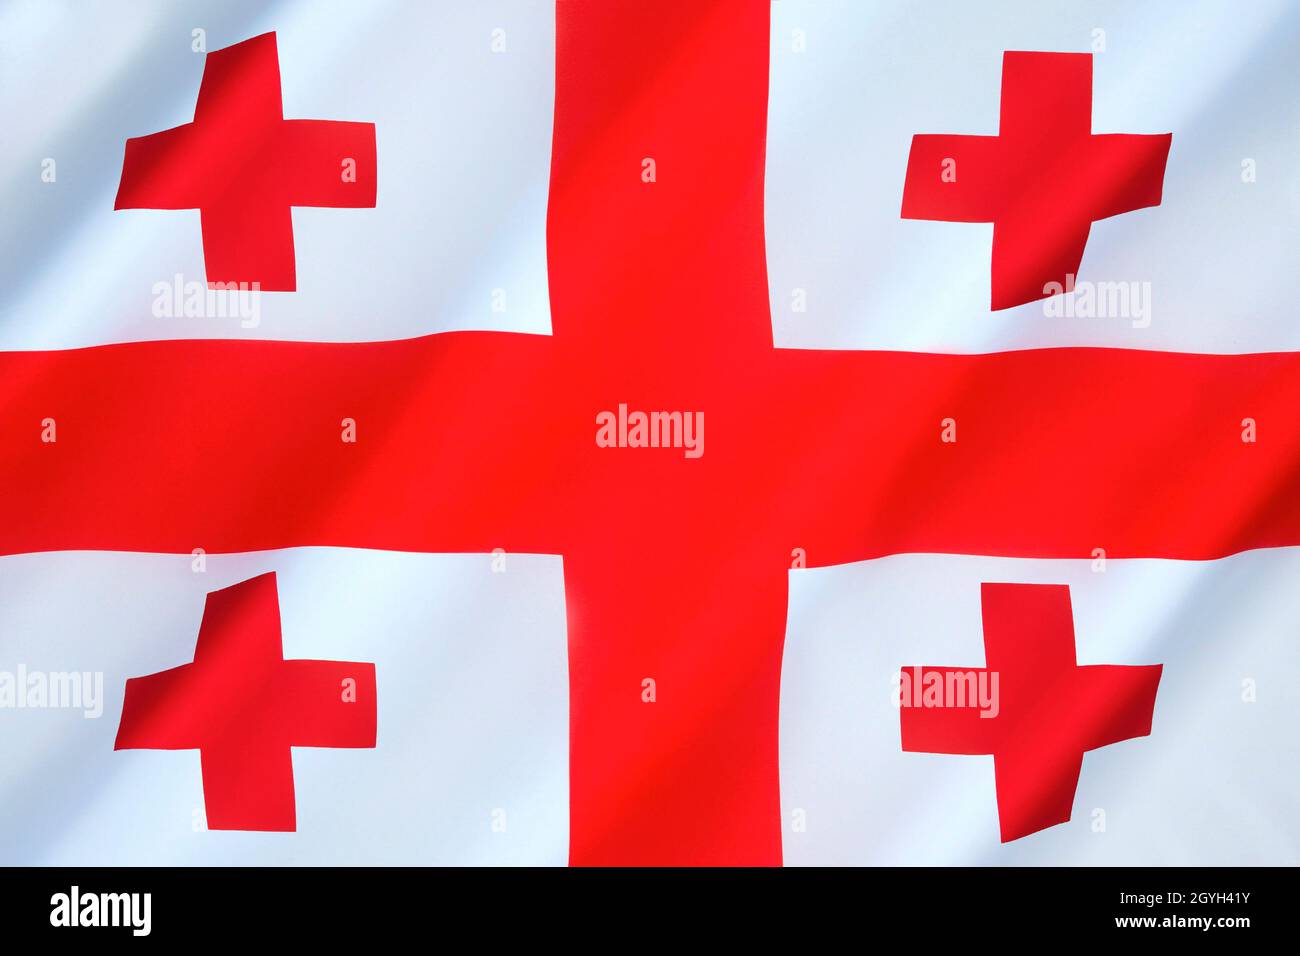 National flag, civil and state ensign of Georgia Stock Photo